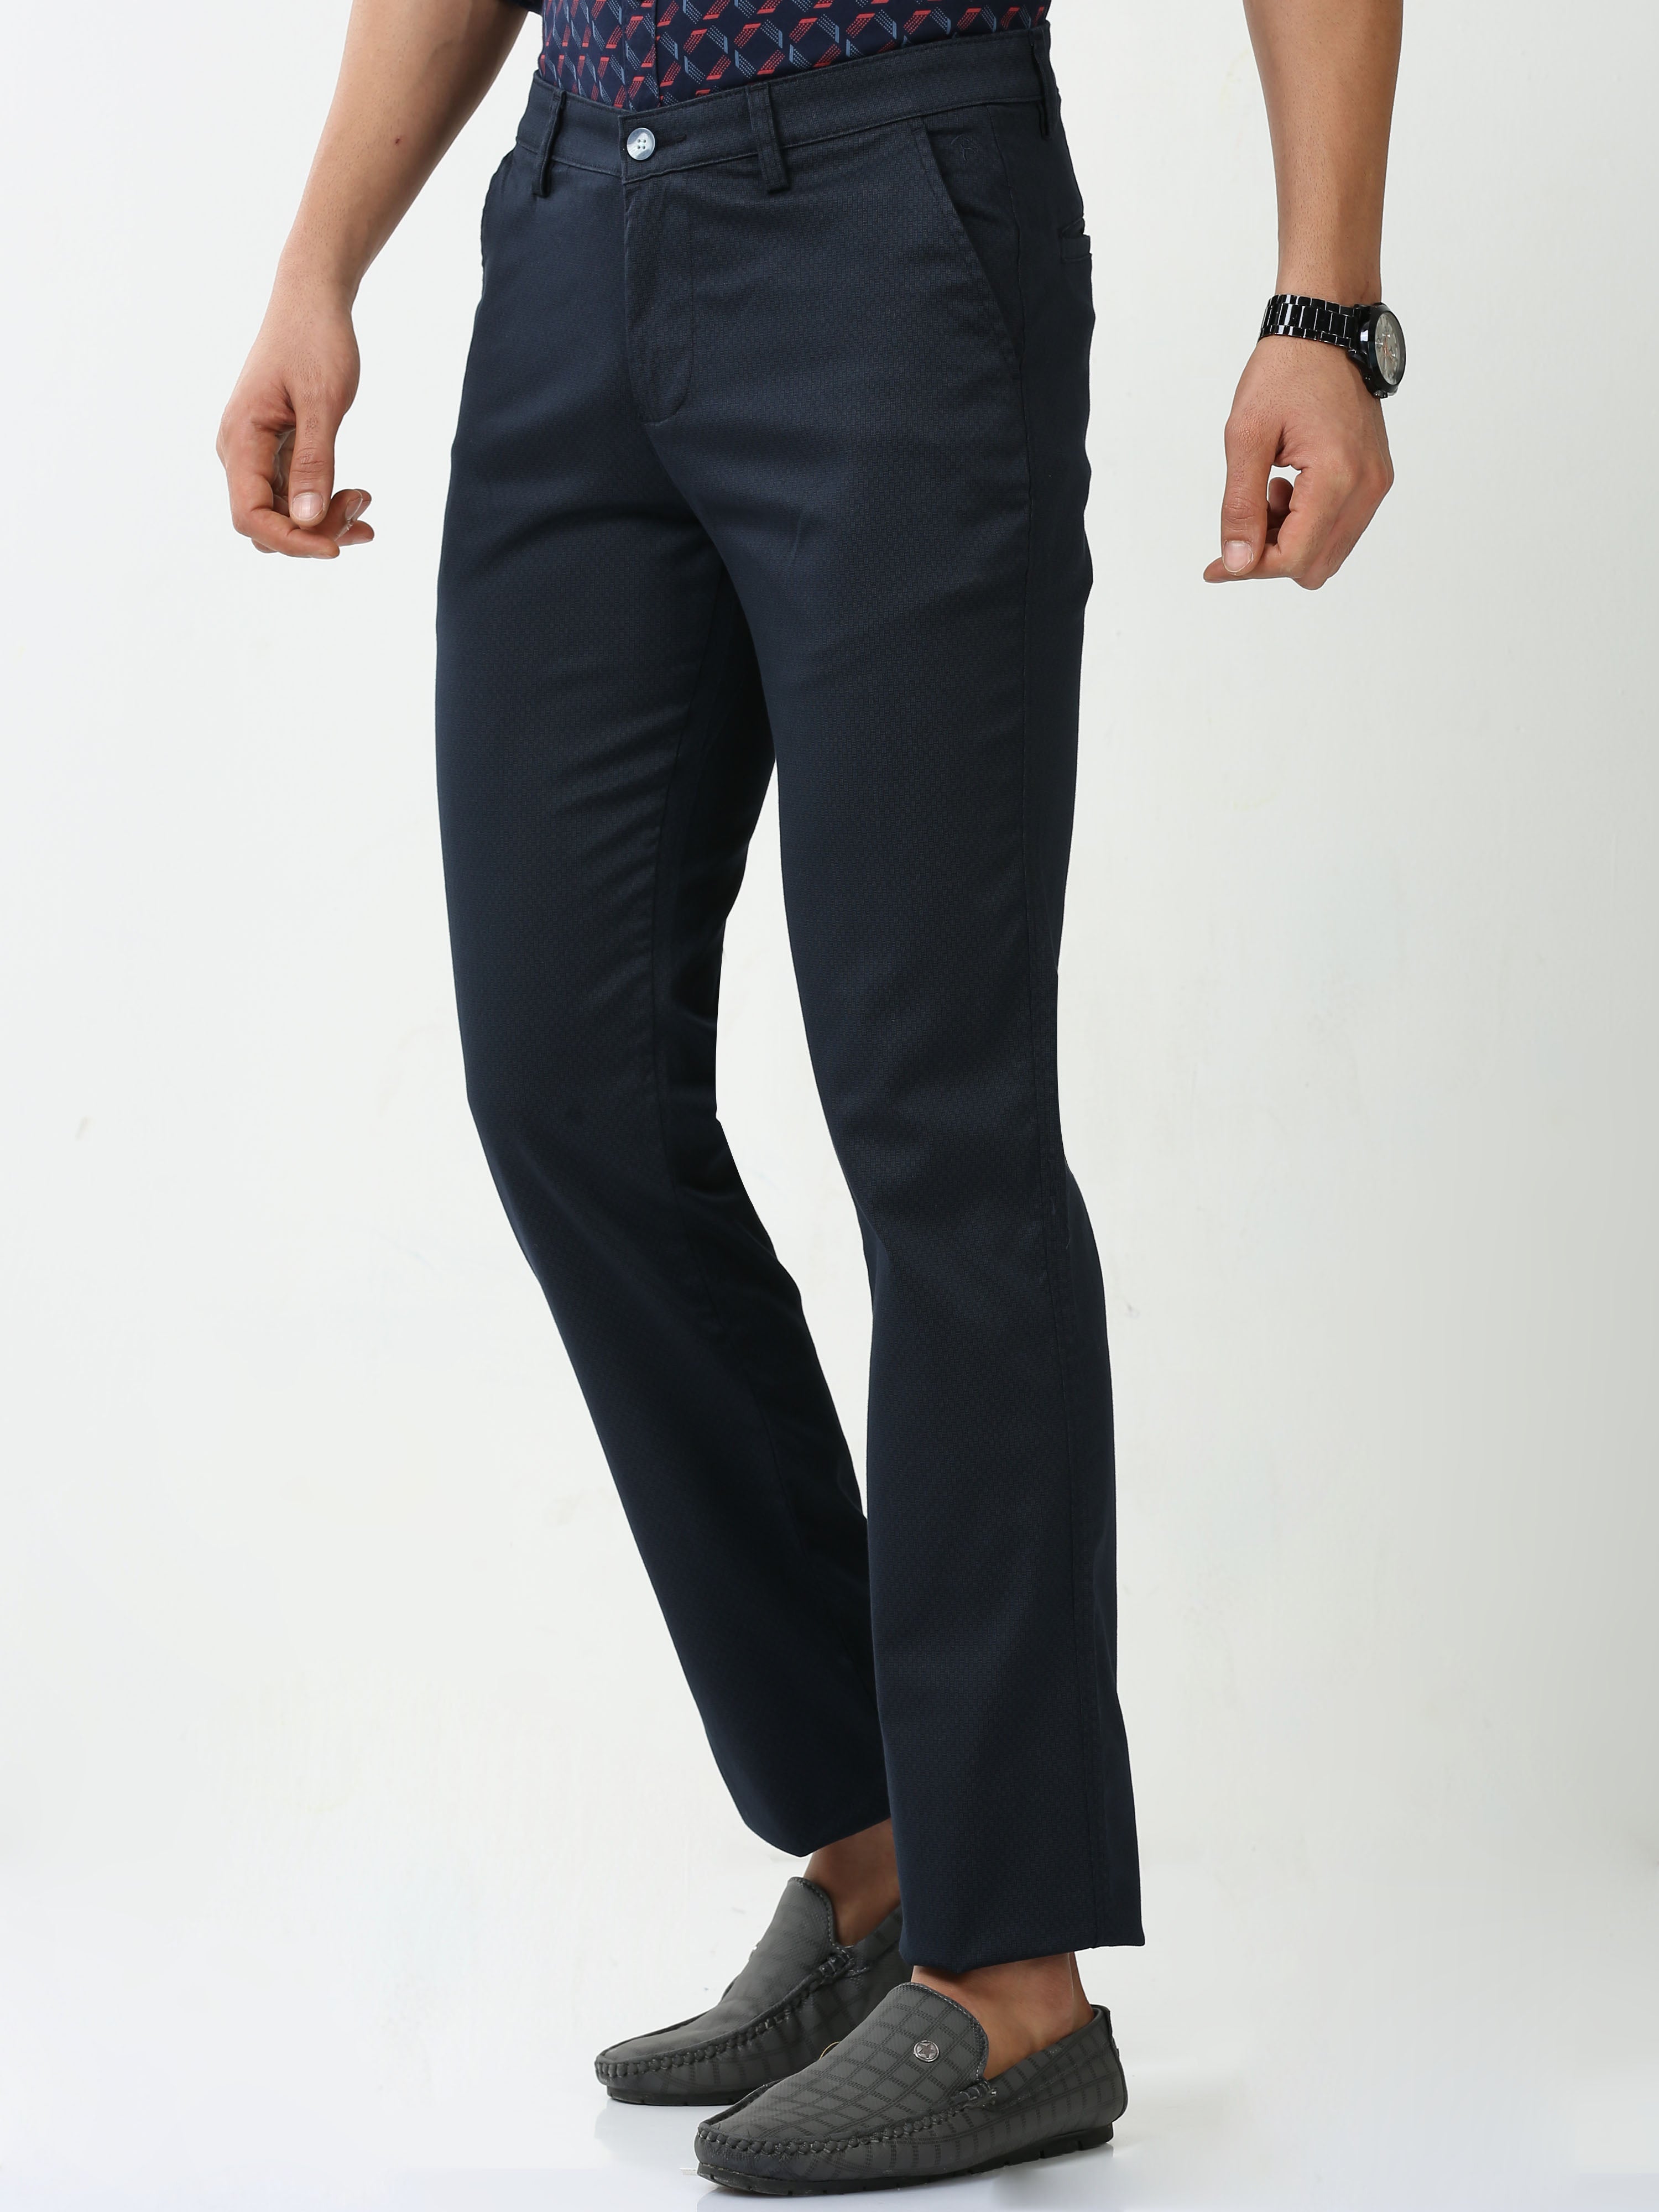 Classic Polo Mens Cotton Printed Chiesel Fit Navy Blue Color Trouser | TBO2-25 B-NVY-CF-LY